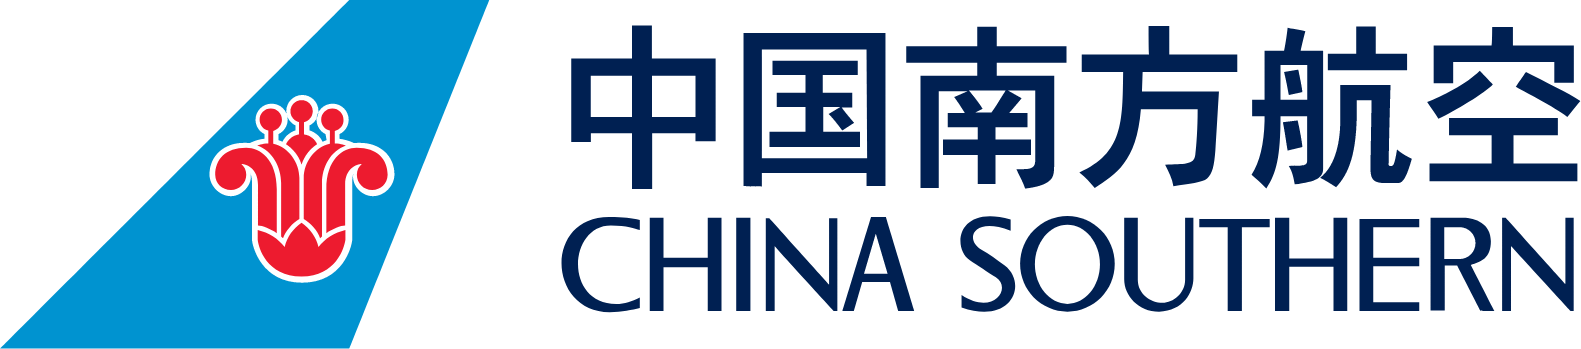 China Southern Airlines
 logo large (transparent PNG)